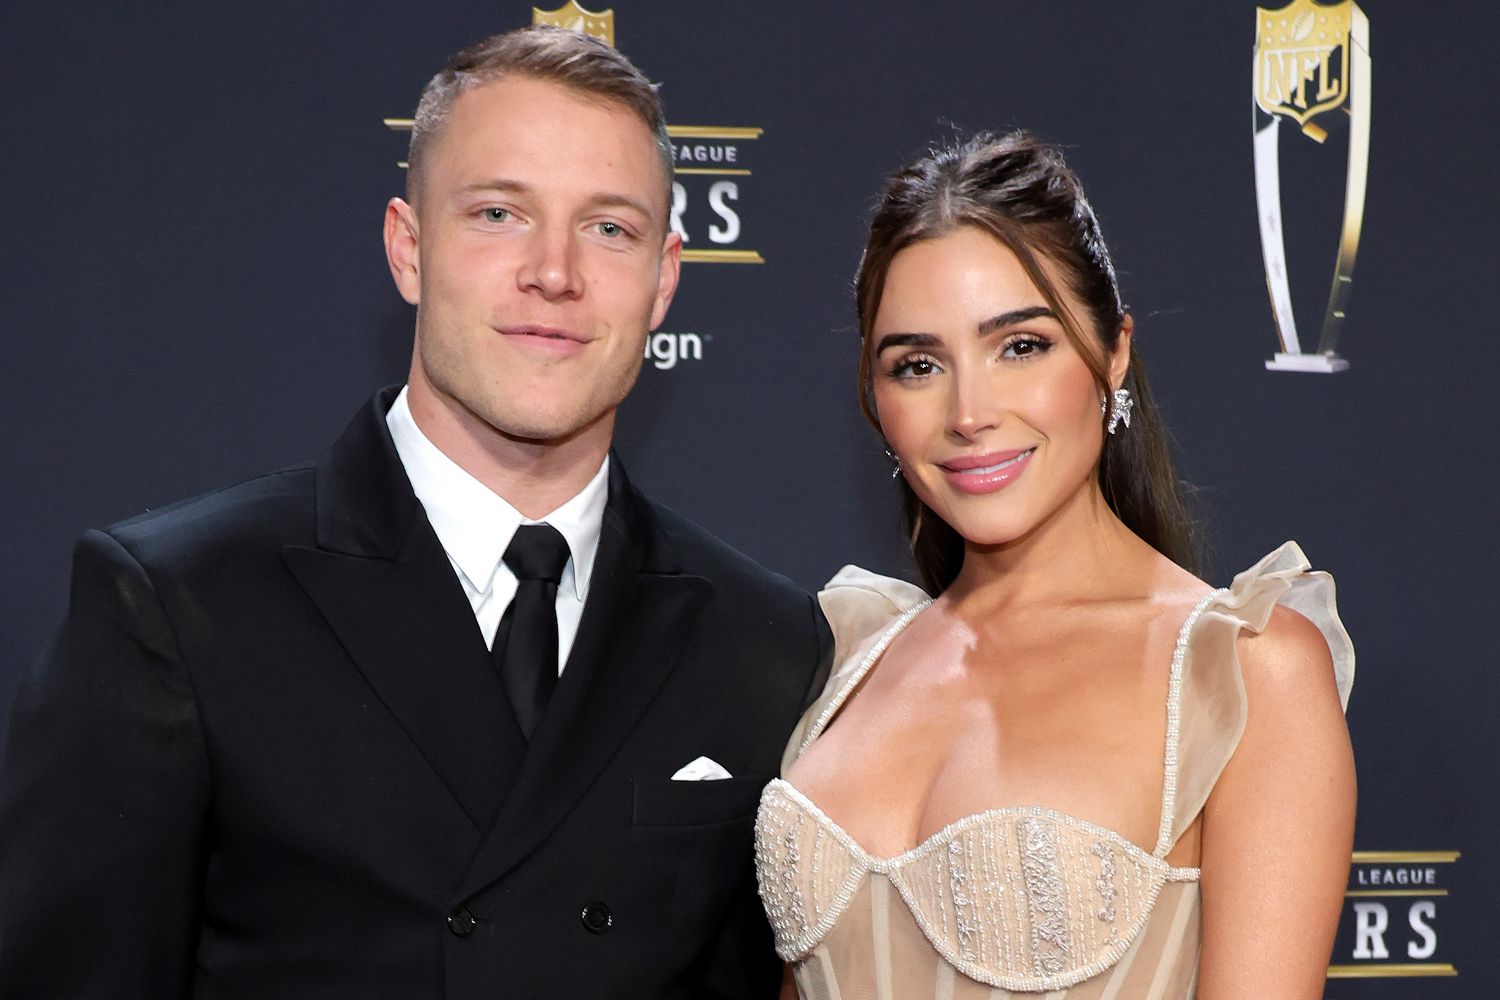 Olivia Culpo Plans To Start A Family With Christian McCaffrey After Wedding